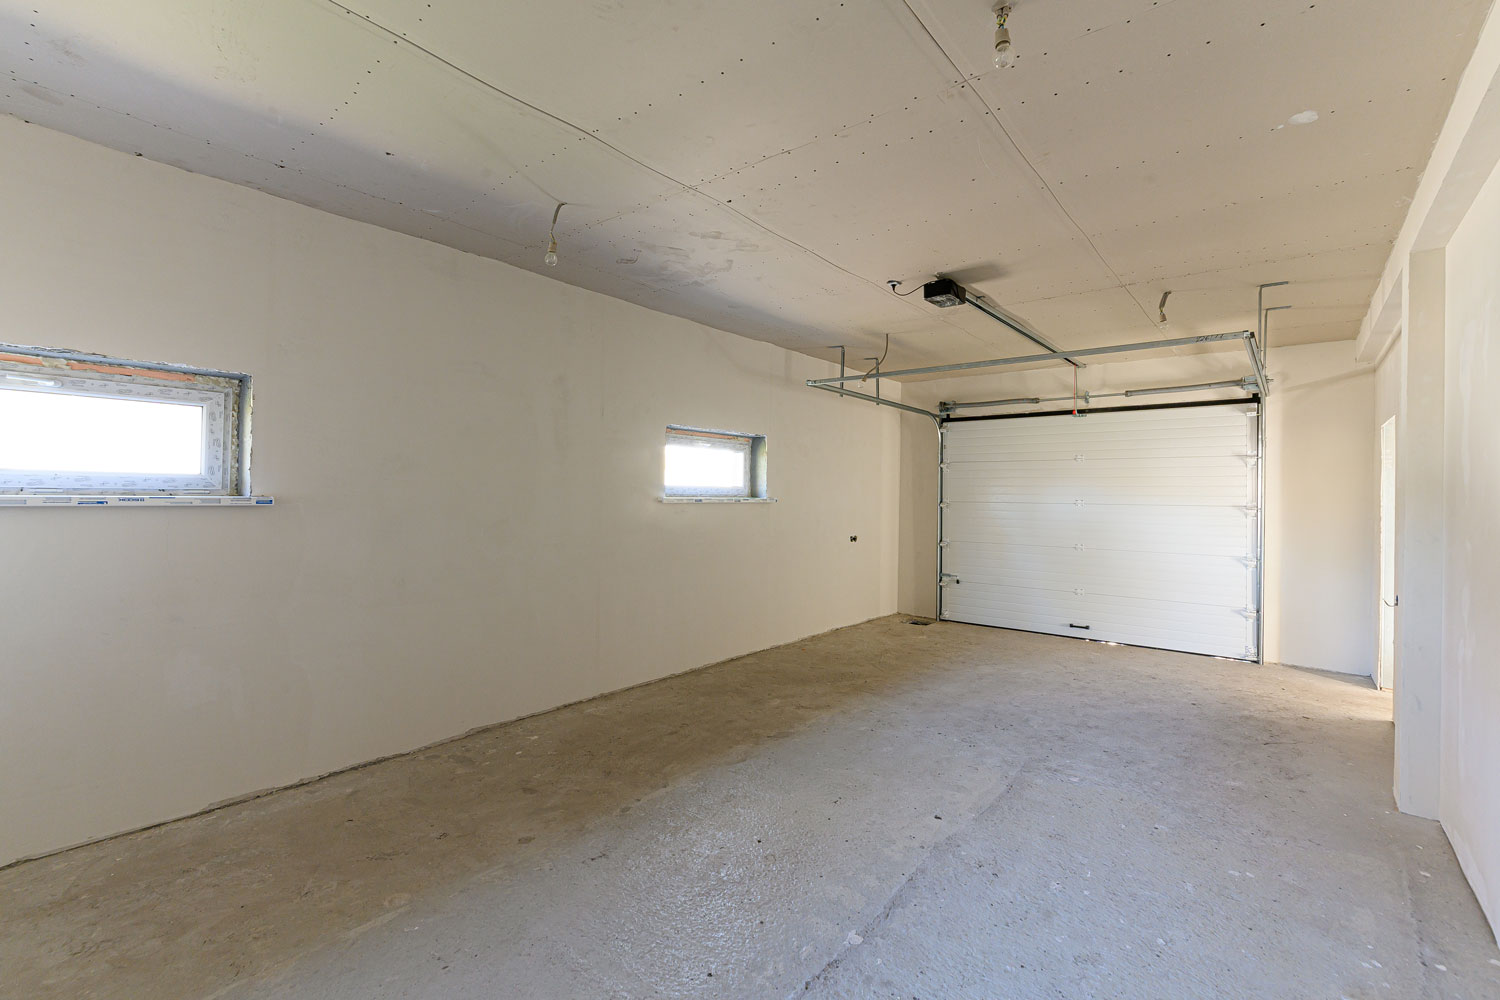 Interior of an empty white garage with small windows and a white garage door